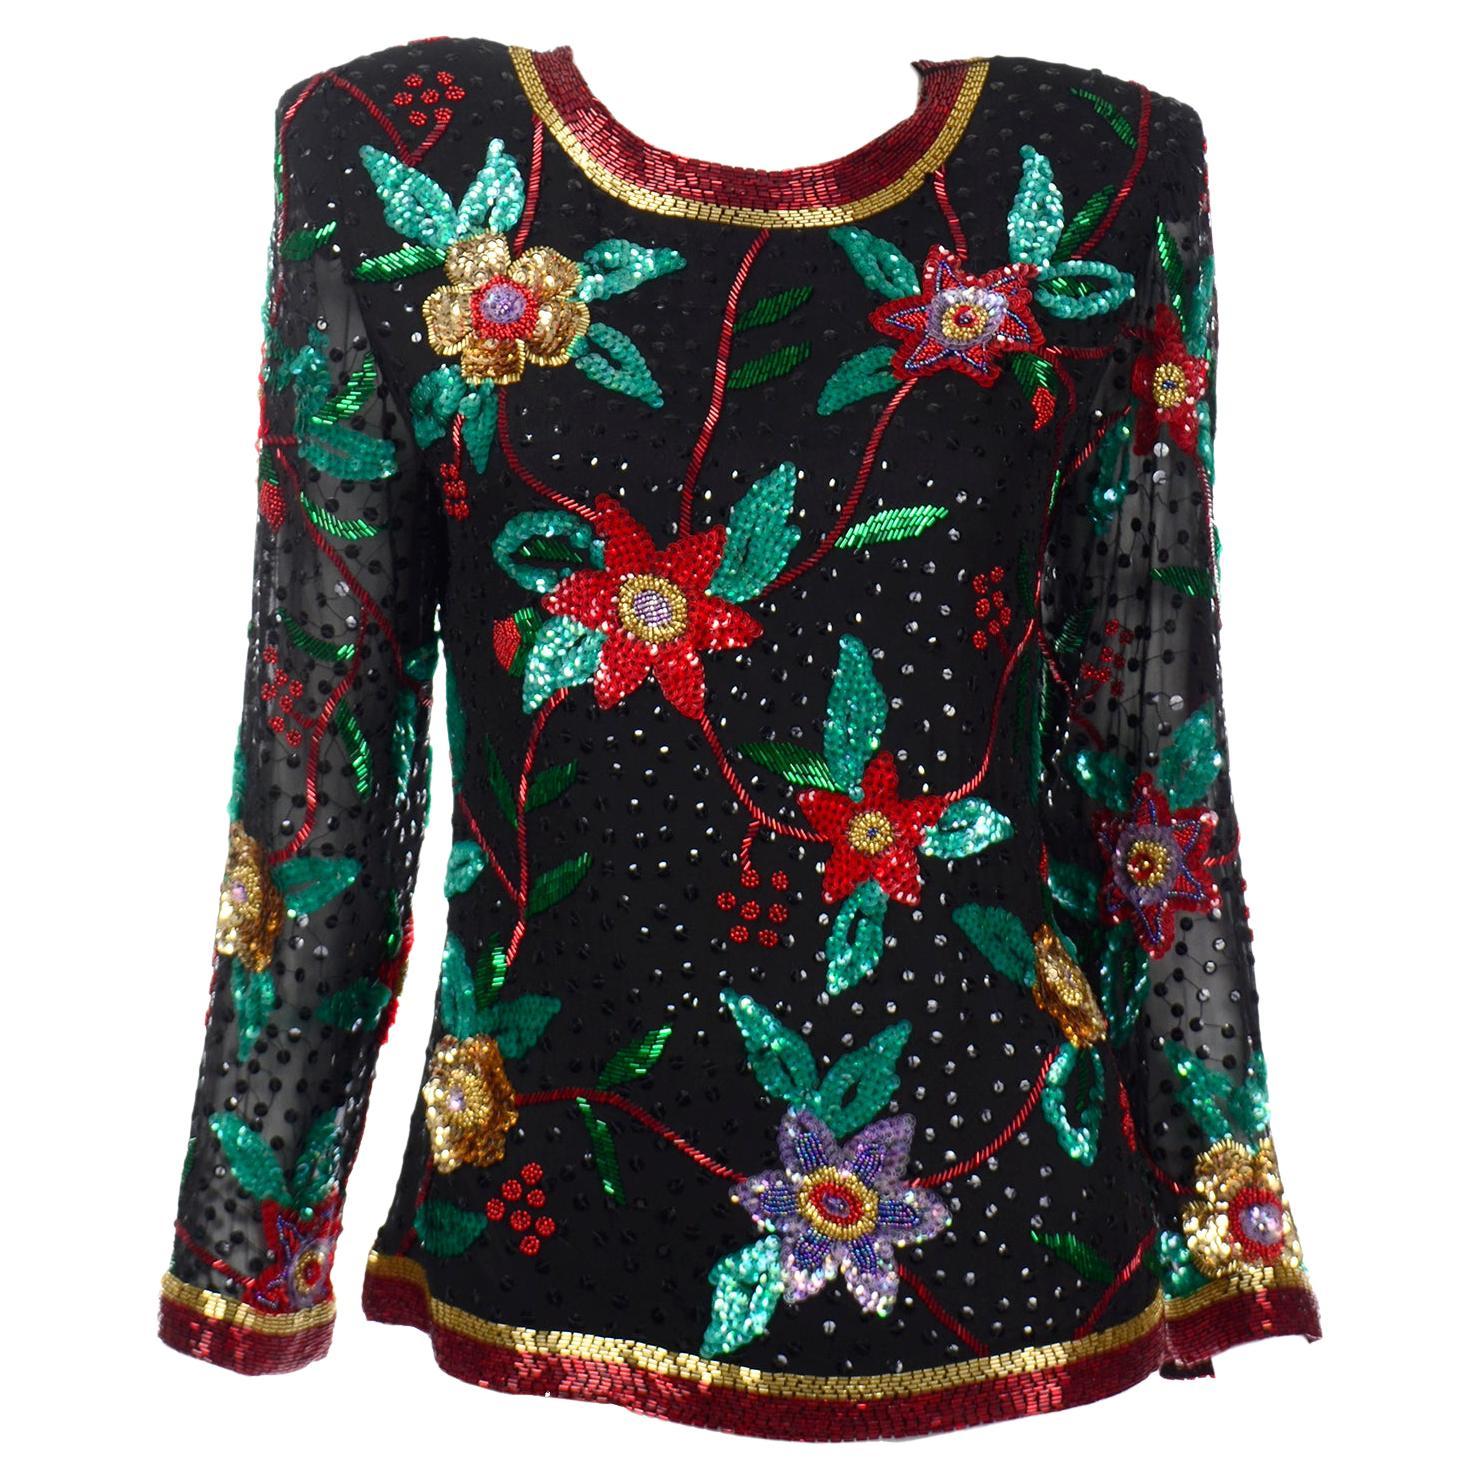 Oleg Cassini Vintage Beaded and Sequins Floral Holiday Top